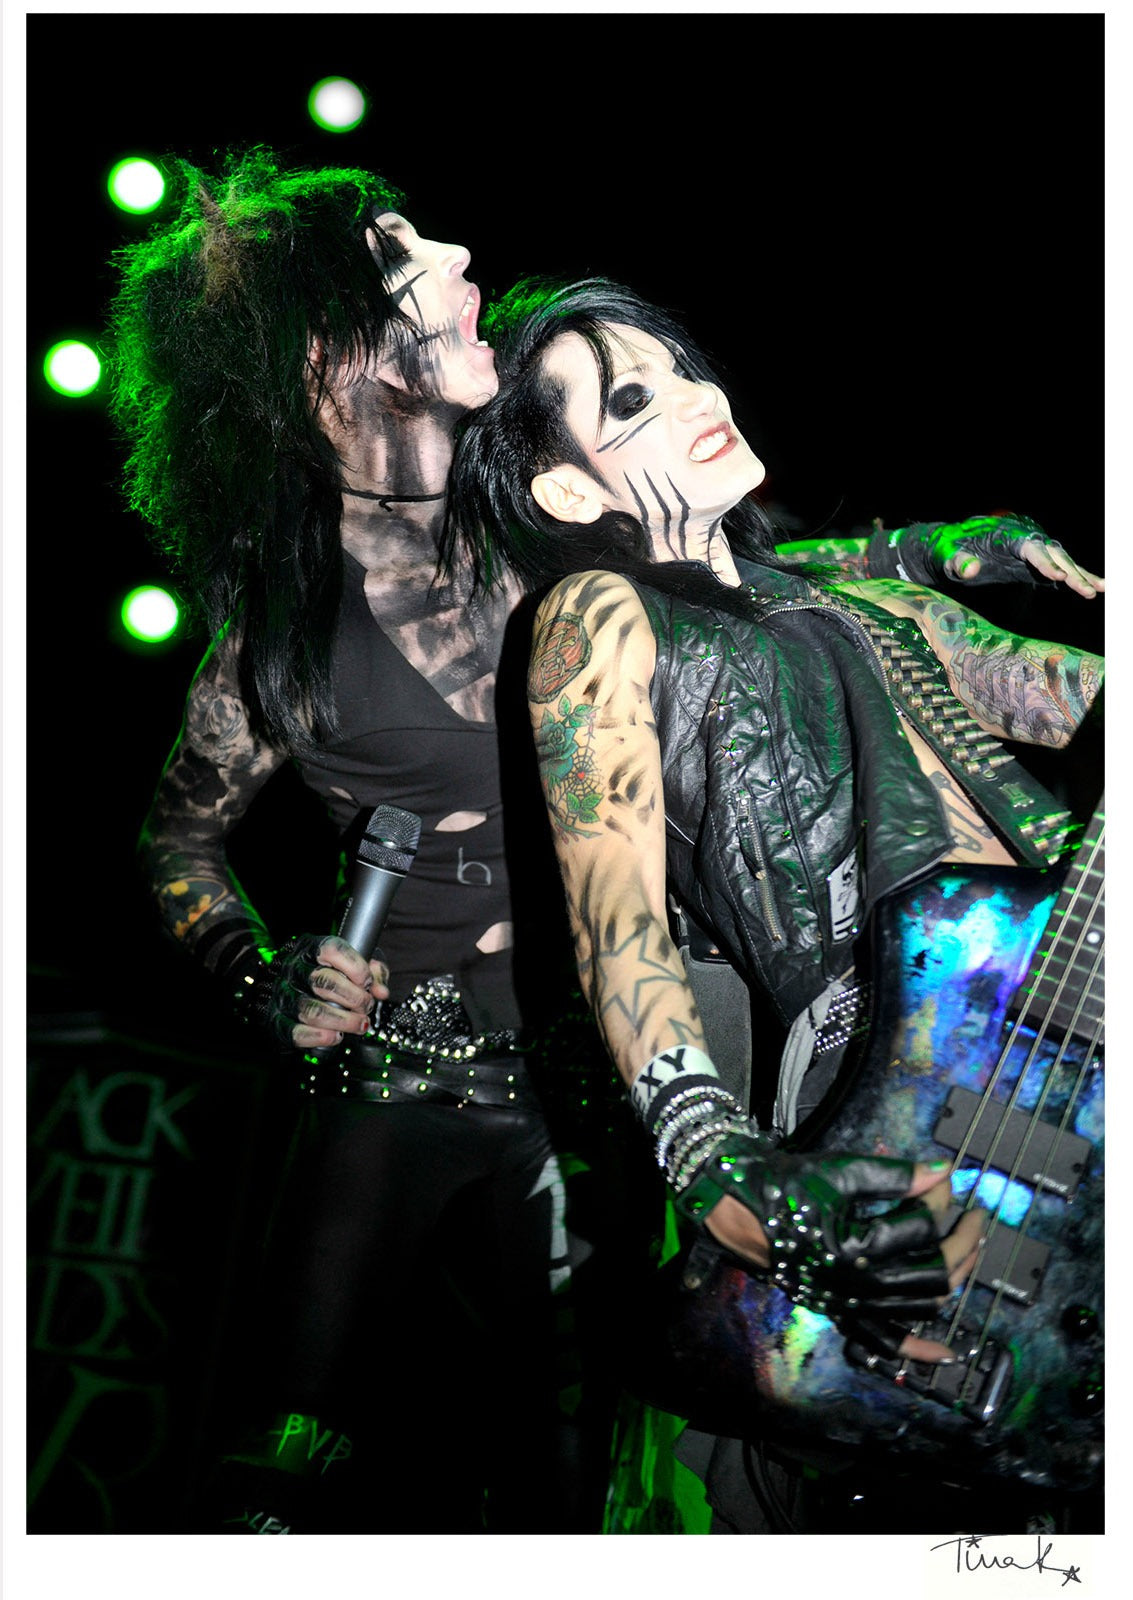 Andy Biersack and Ashley Purdy of Black Veil Brides on stage at the Forum London, 2011. Colour print signed by Tina K photography.